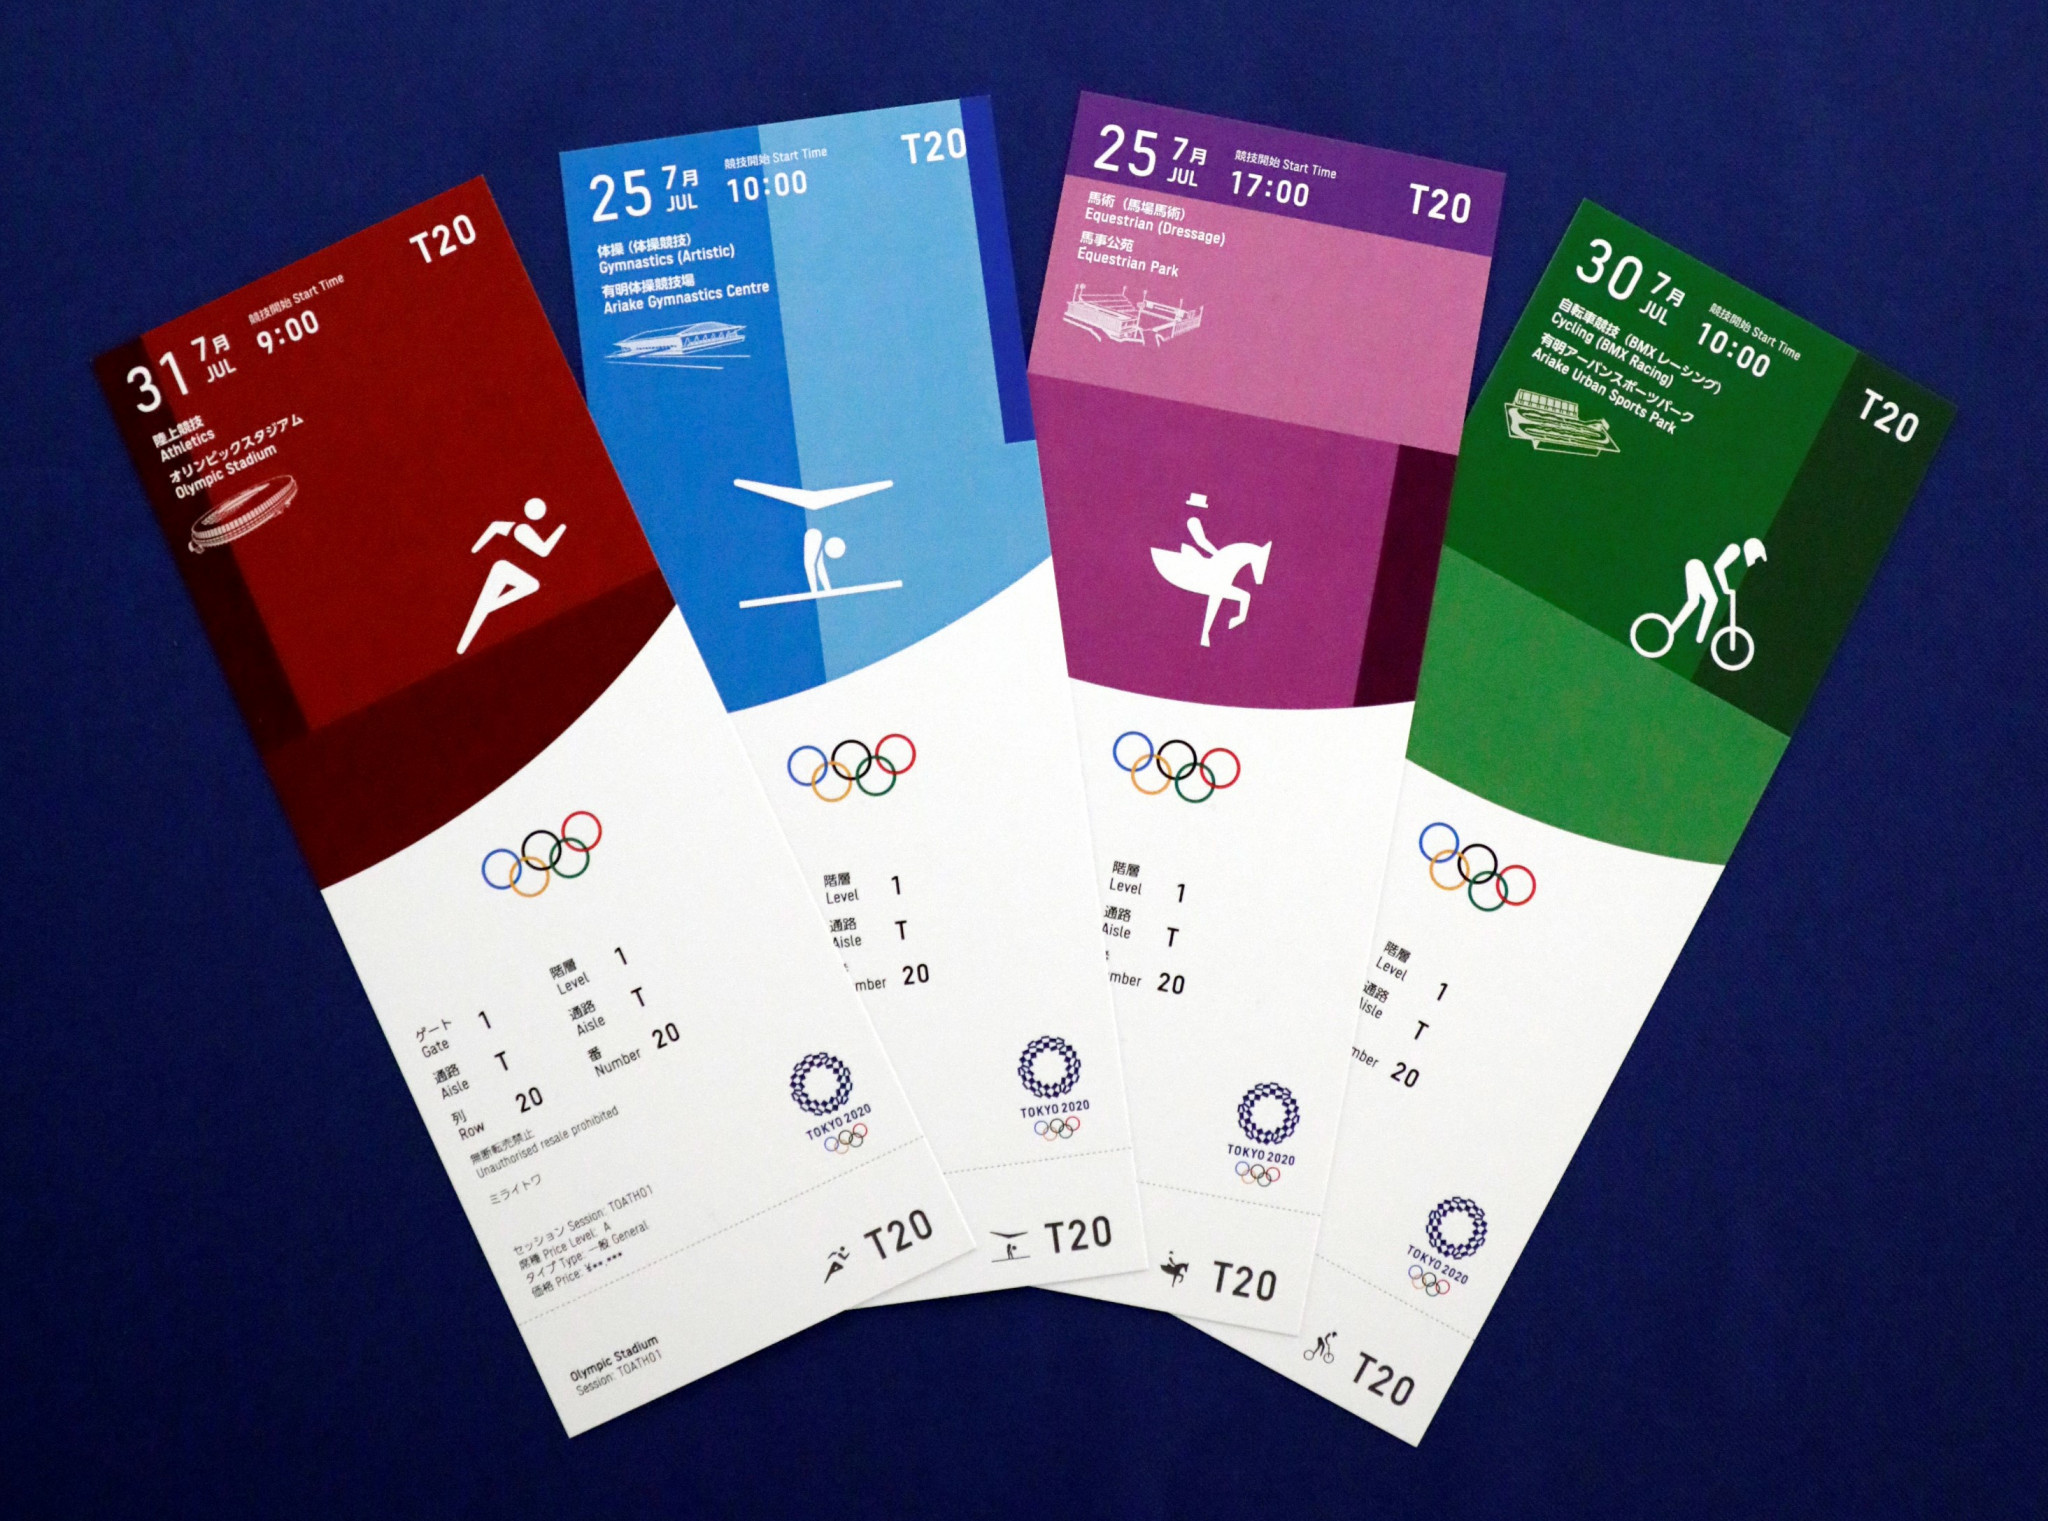 International fans will be able to buy tickets online for the Tokyo 2020 Olympics in May ©Tokyo 2020